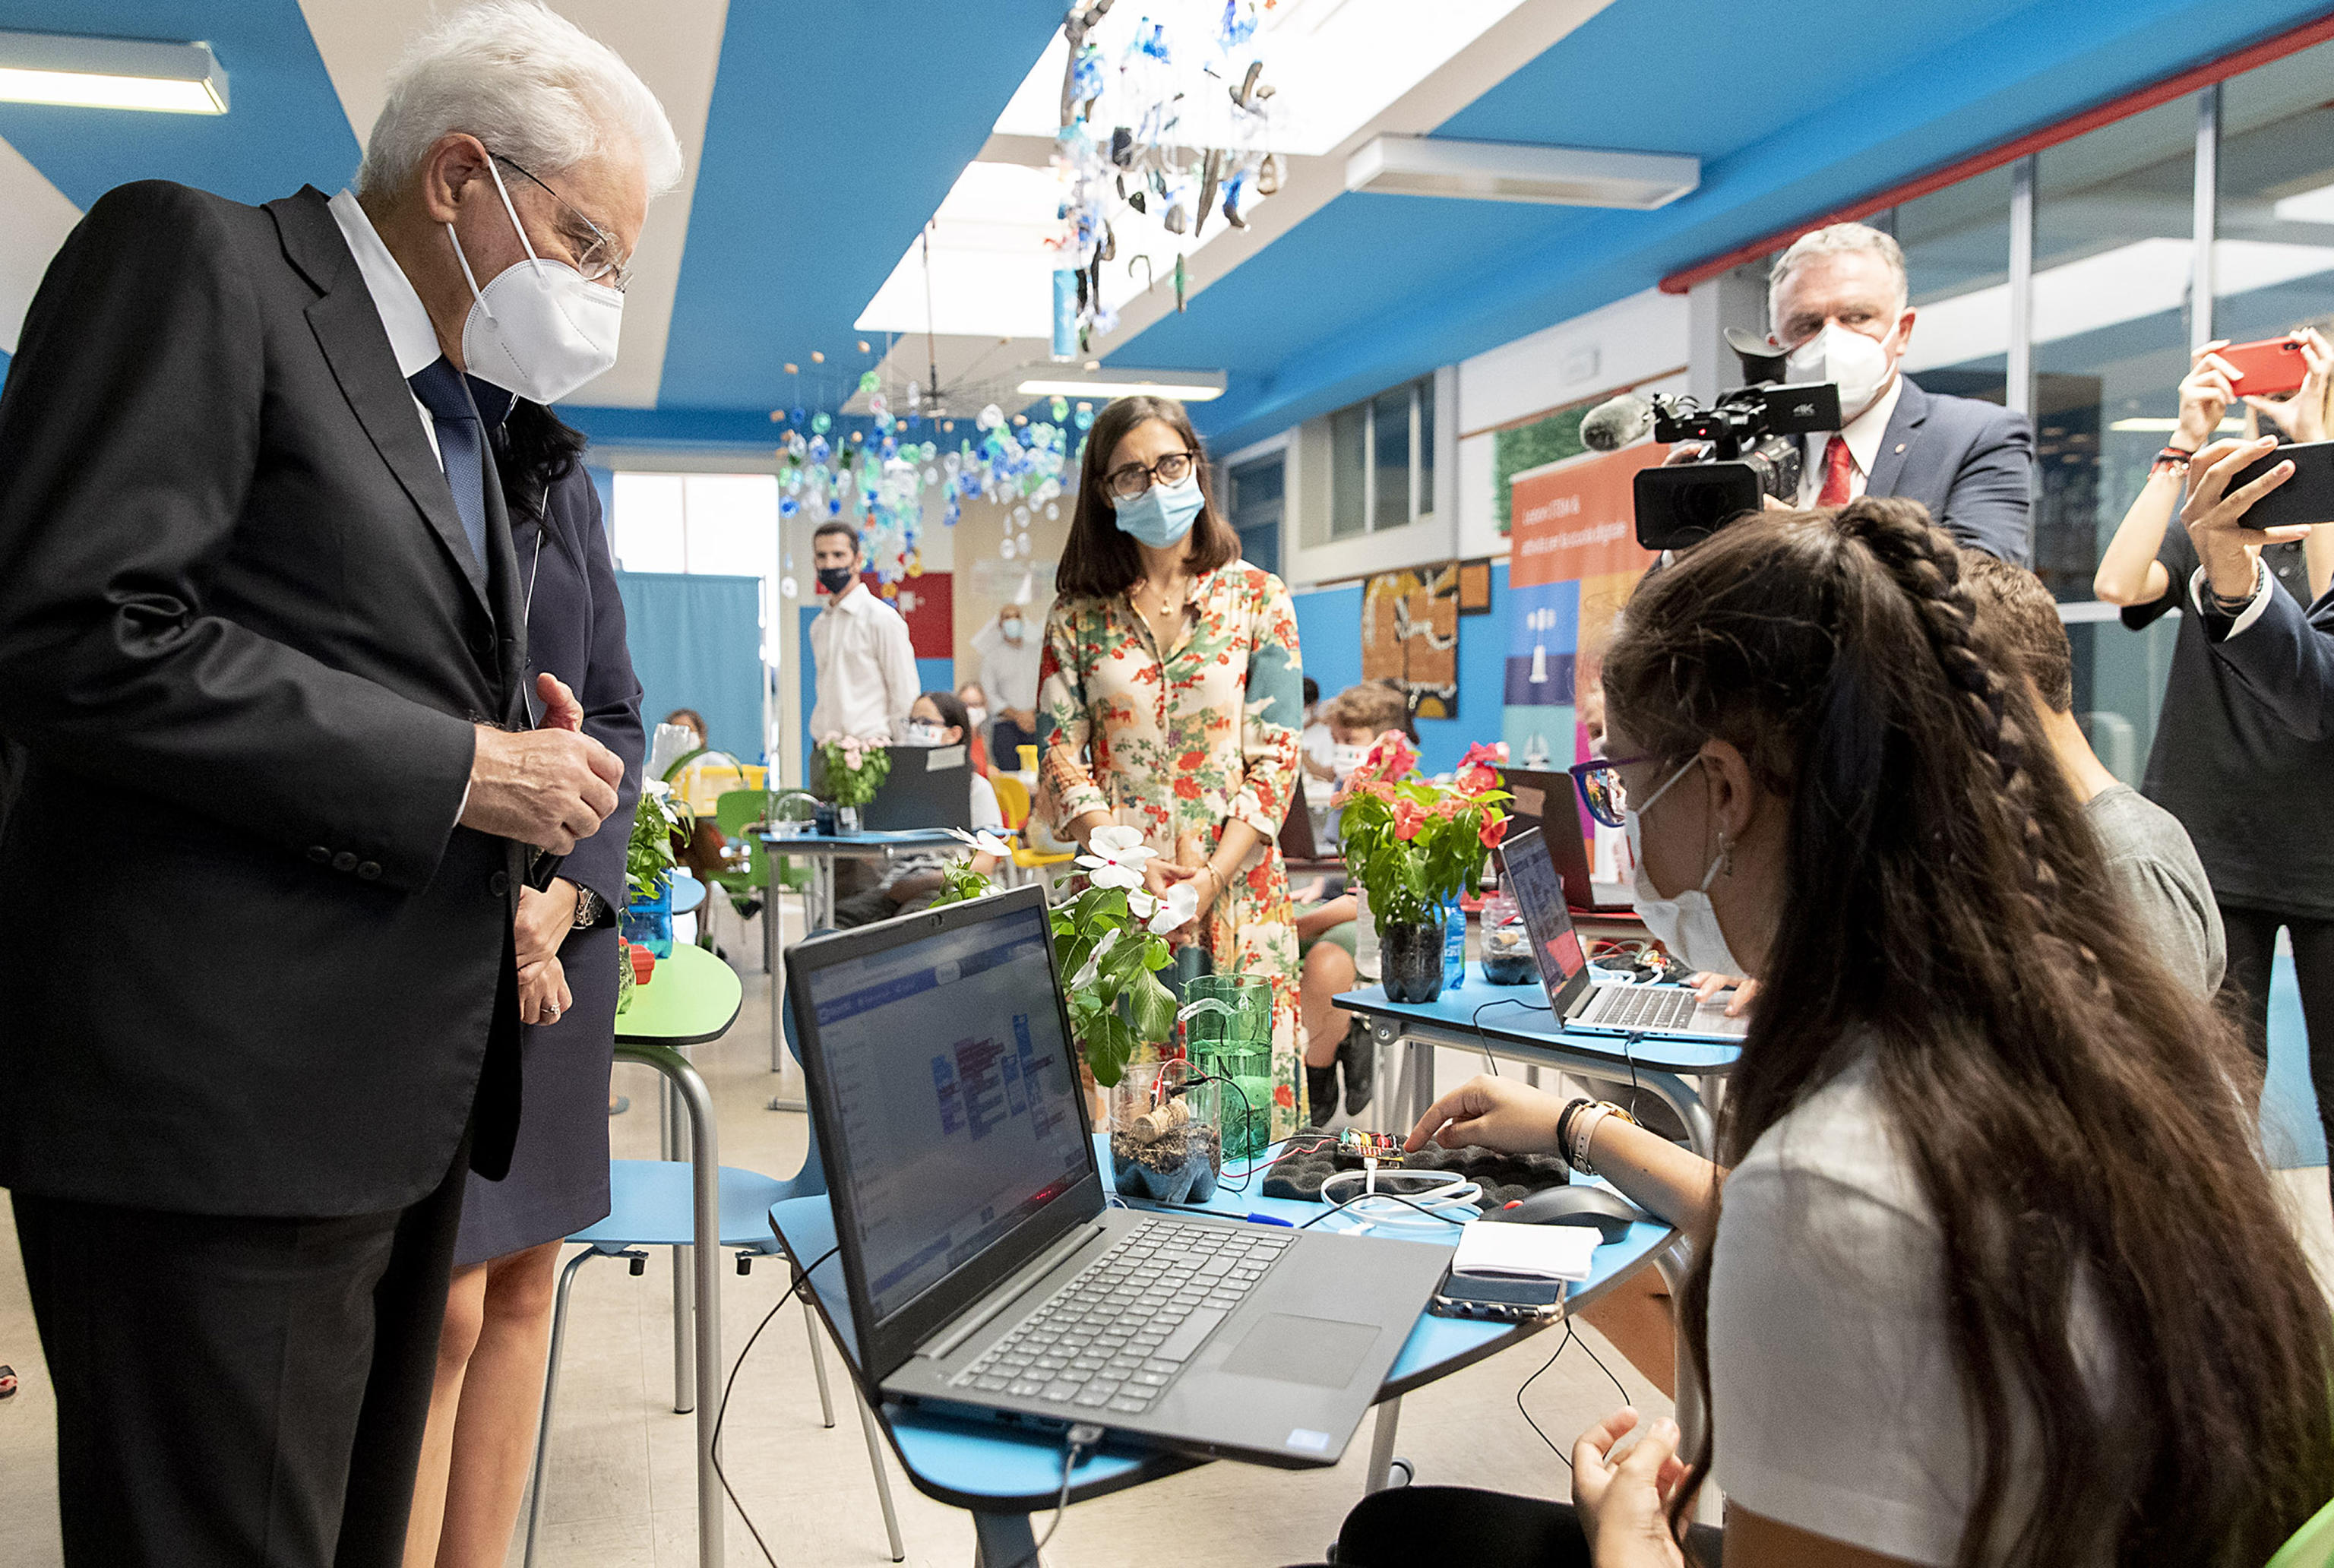 Italian Republic, Sergio Mattarella, at the 'Guido Negri' primary school in Vo' Euganeo, the municipality that recorded the first death from Coronavirus Covid-19 on 21 February that was the first in the Veneto Region to enter in the lockdown, on the occasion of the initiatives for the opening of the 2020-2021 school year, Italy, 14 September 2020.
ANSA/QUIRINALE PRESS OFFICE/PAOLO GIANDOTTI
+++ ANSA PROVIDES ACCESS TO THIS HANDOUT PHOTO TO BE USED SOLELY TO ILLUSTRATE NEWS REPORTING OR COMMENTARY ON THE FACTS OR EVENTS DEPICTED IN THIS IMAGE; NO ARCHIVING; NO LICENSING +++